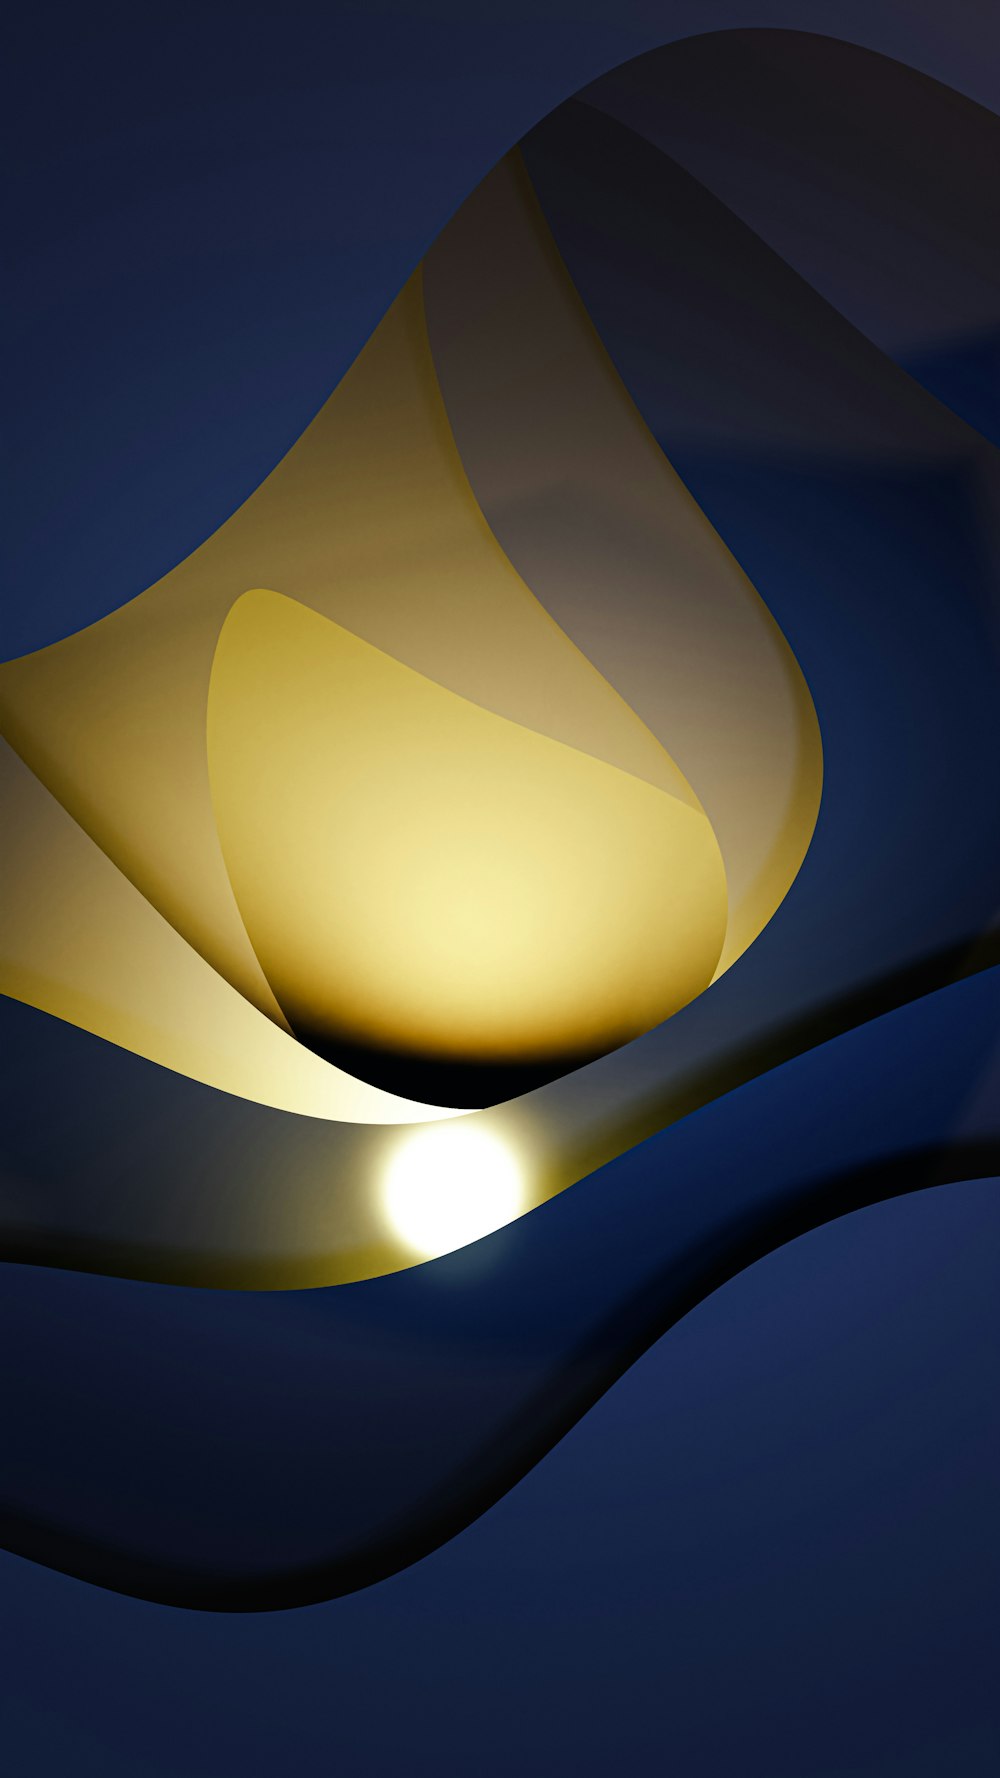 an abstract image of a yellow light on a blue background